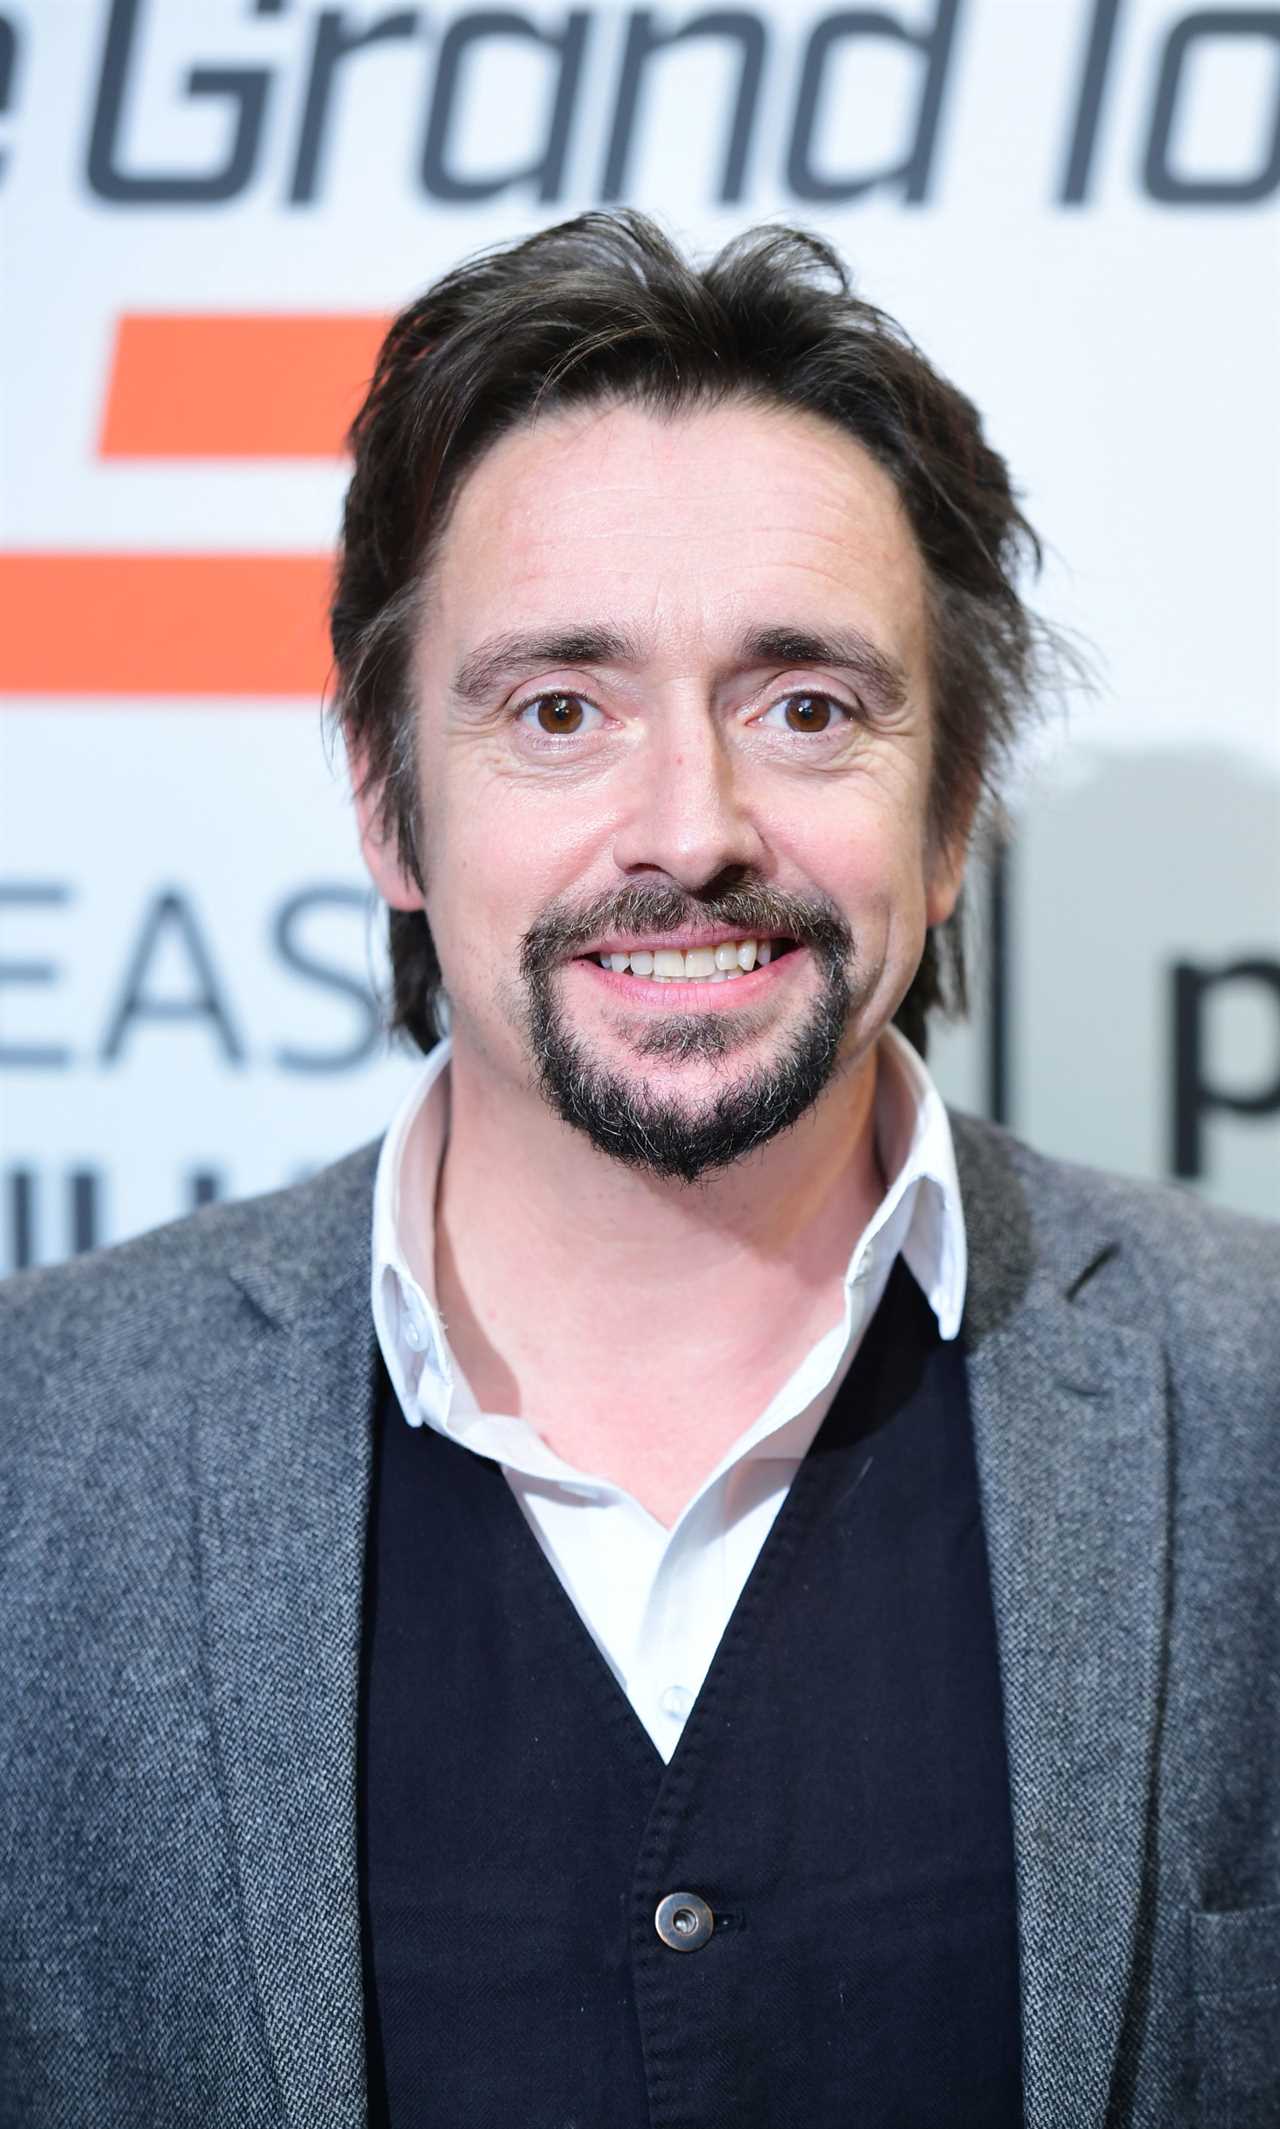 Richard Hammond fears awful memory is dementia caused by high-speed smash